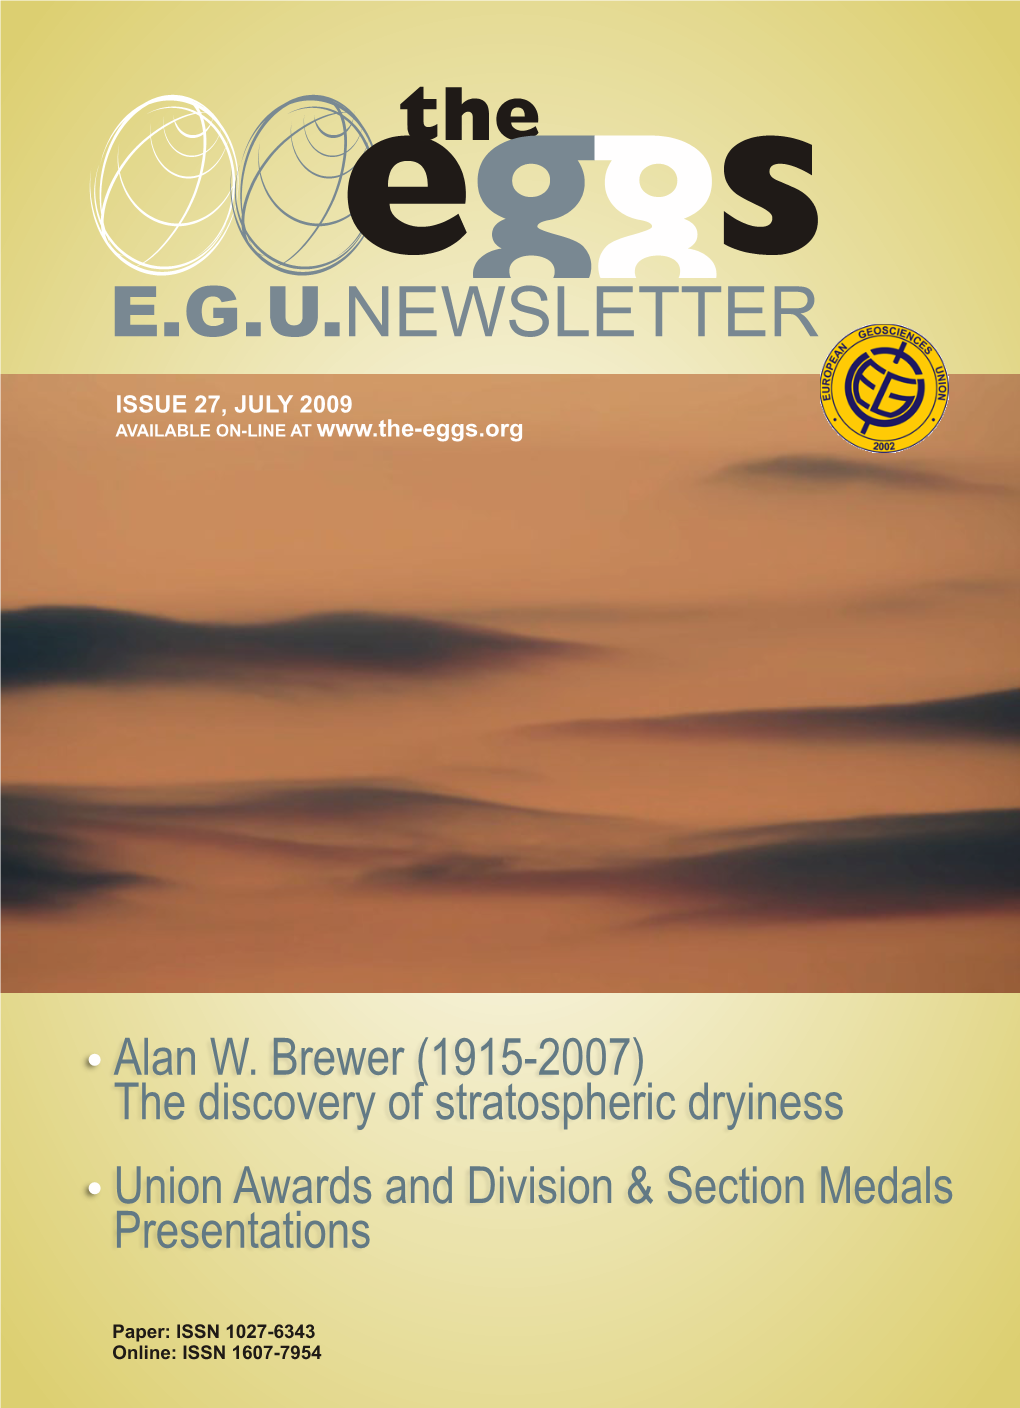 Alan W. Brewer (1915-2007) the Discovery of Stratospheric Dryiness Union Awards and Division & Section Medals Presentations the EGGS | ISSUE 27 | JULY 2009